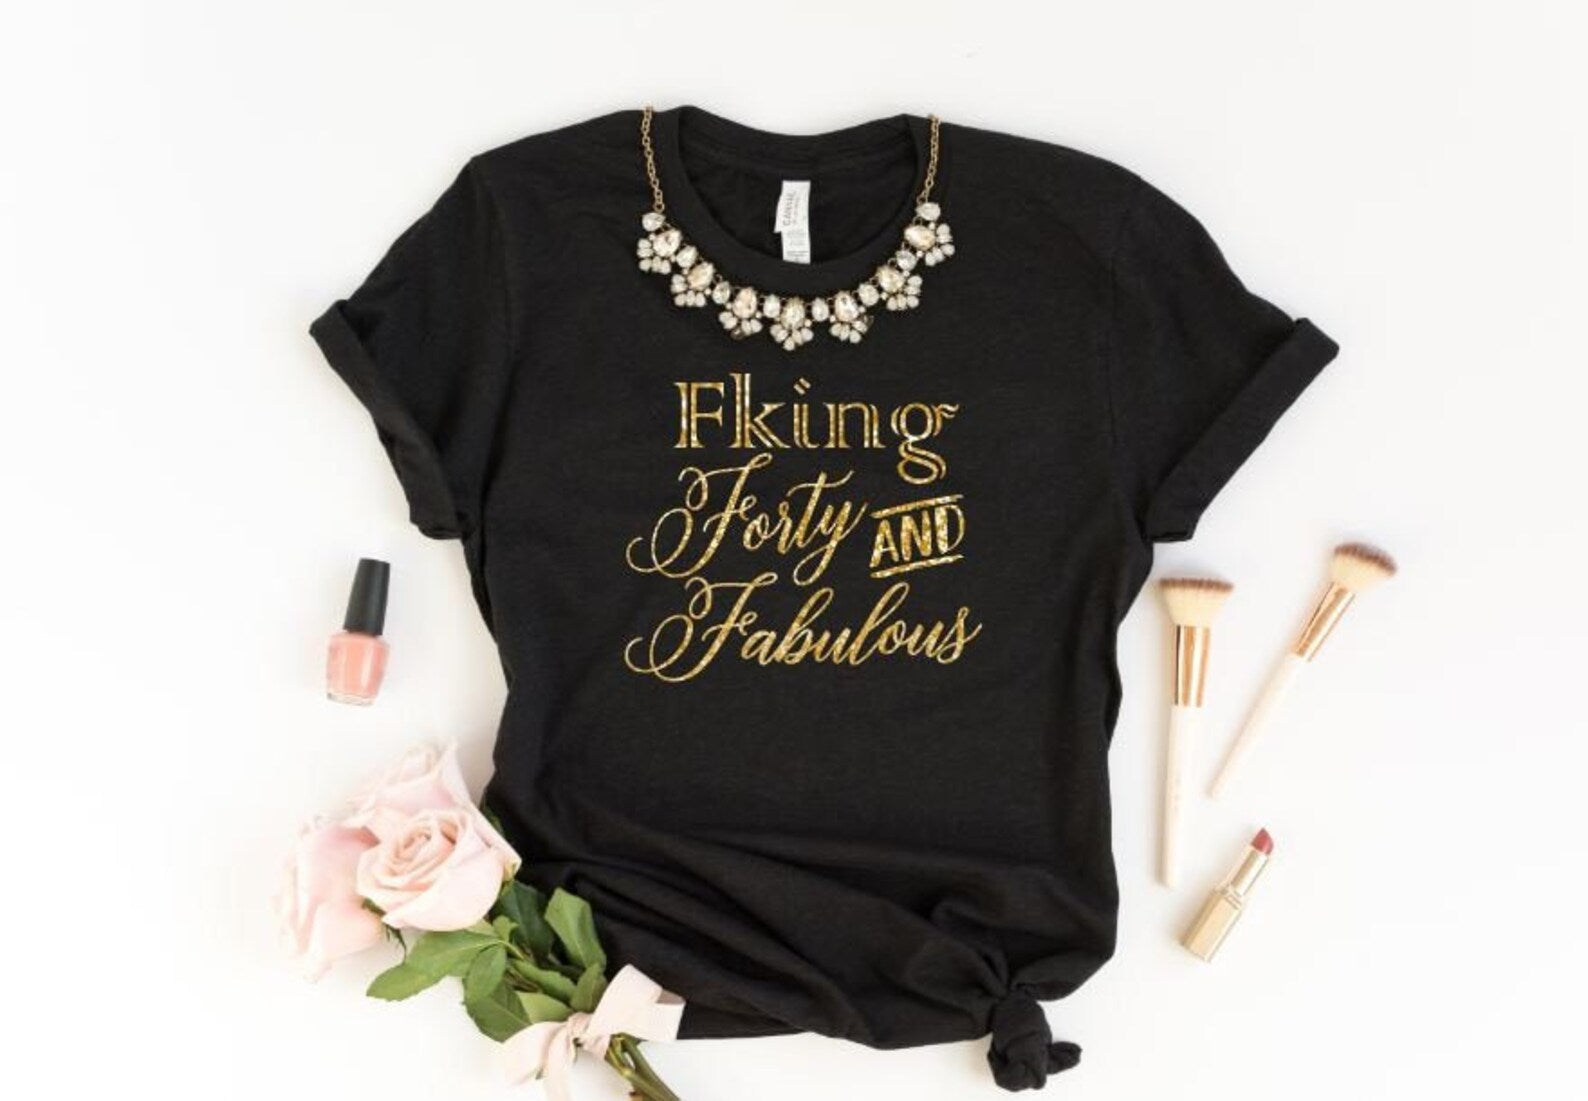 Womens 40 and Fabulous black birthday shirt in black with gold sparkly lettering